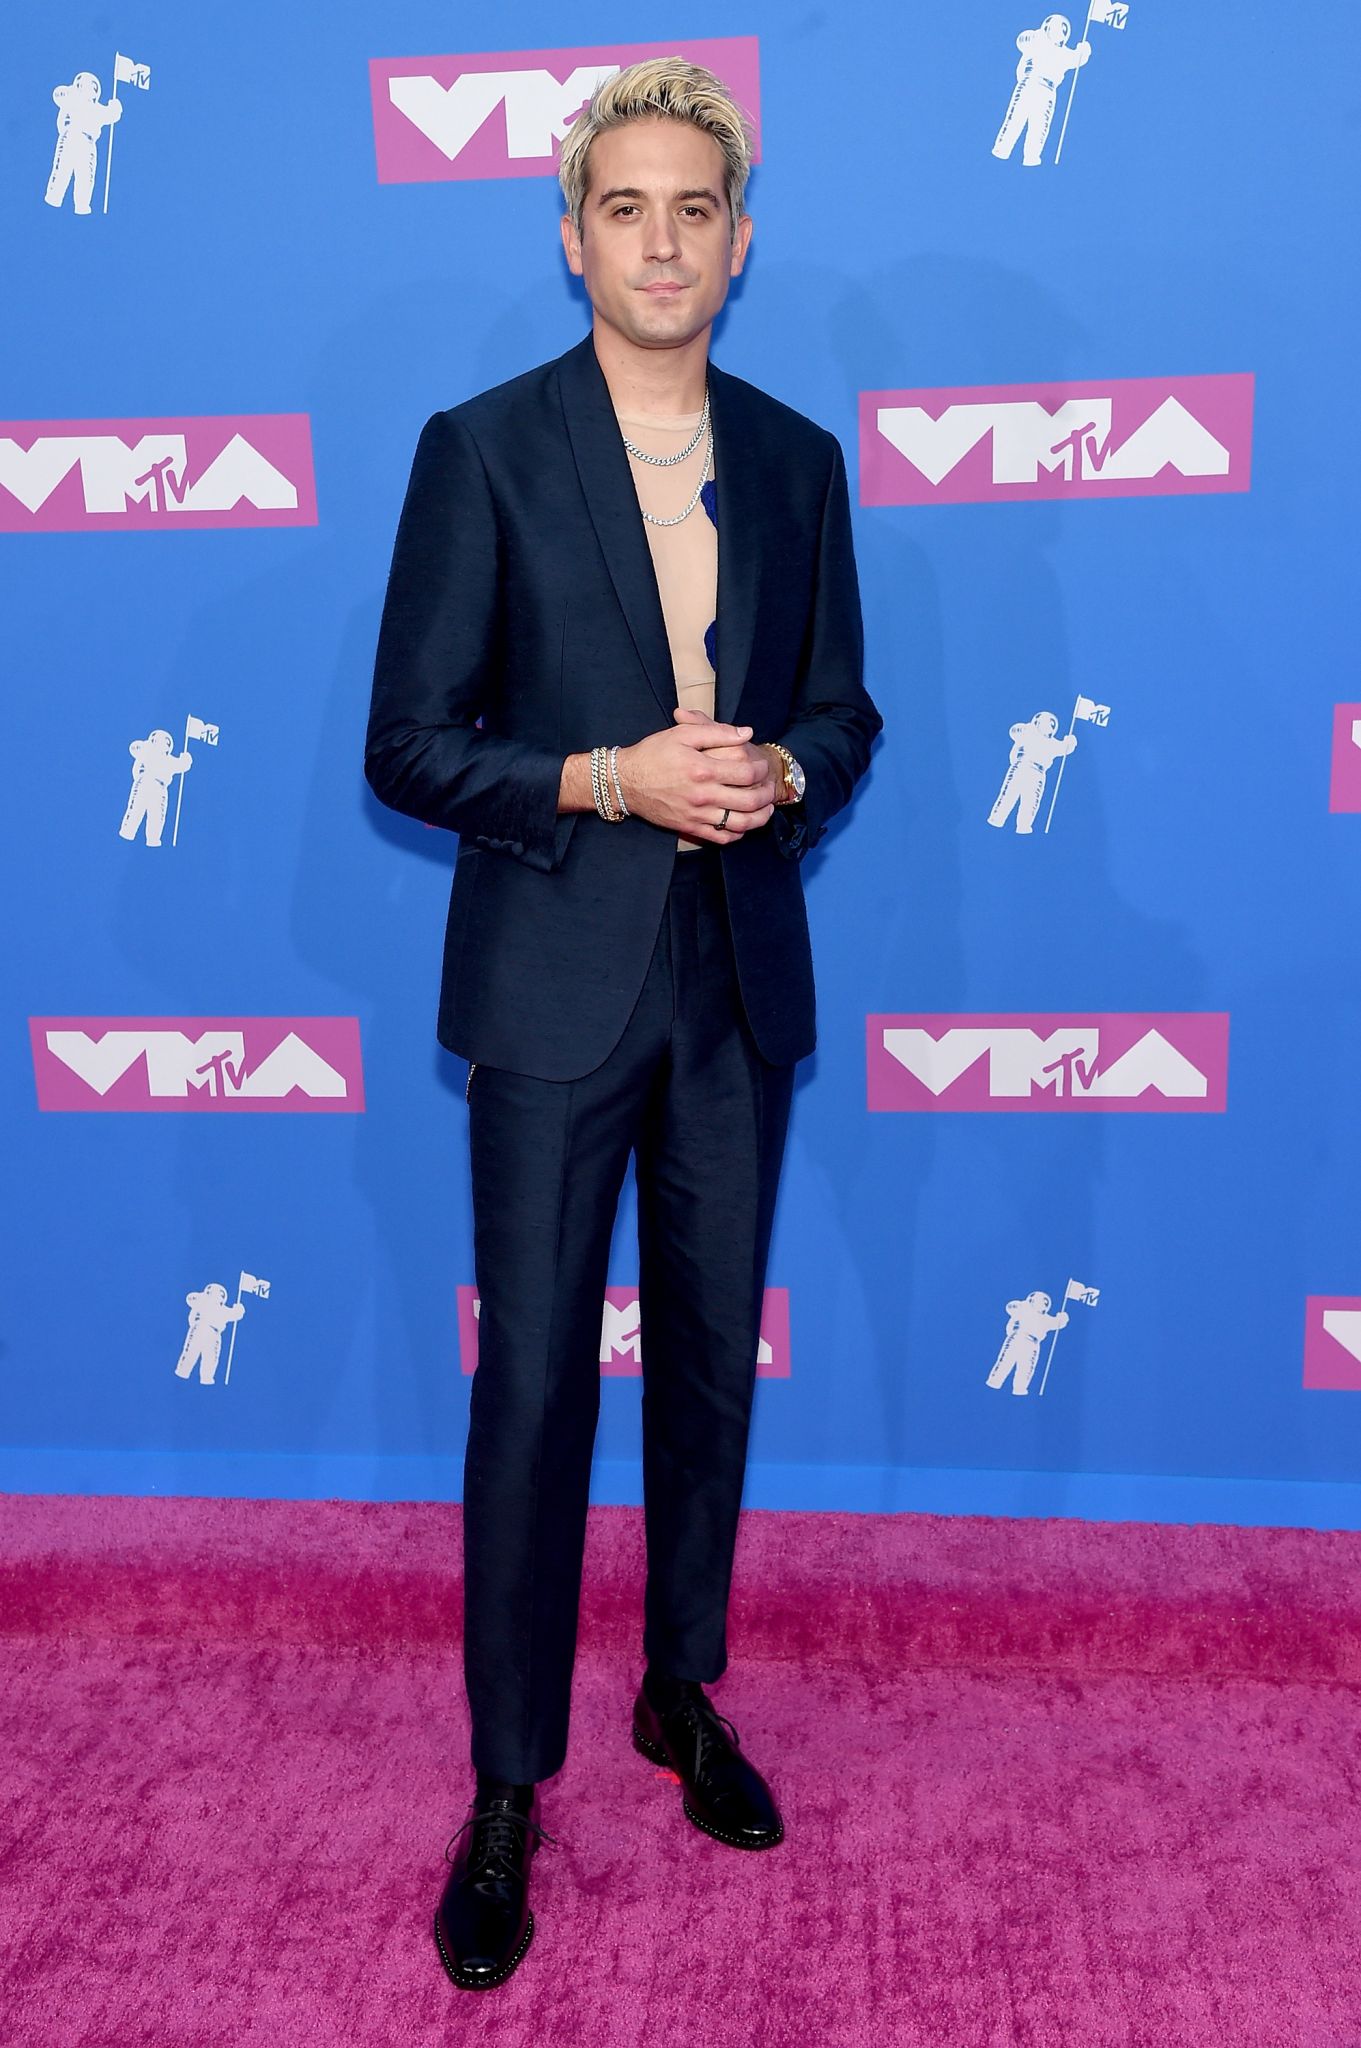 Millie Bobby Brown Hits the Red Carpet at the 2018 MTV VMAs